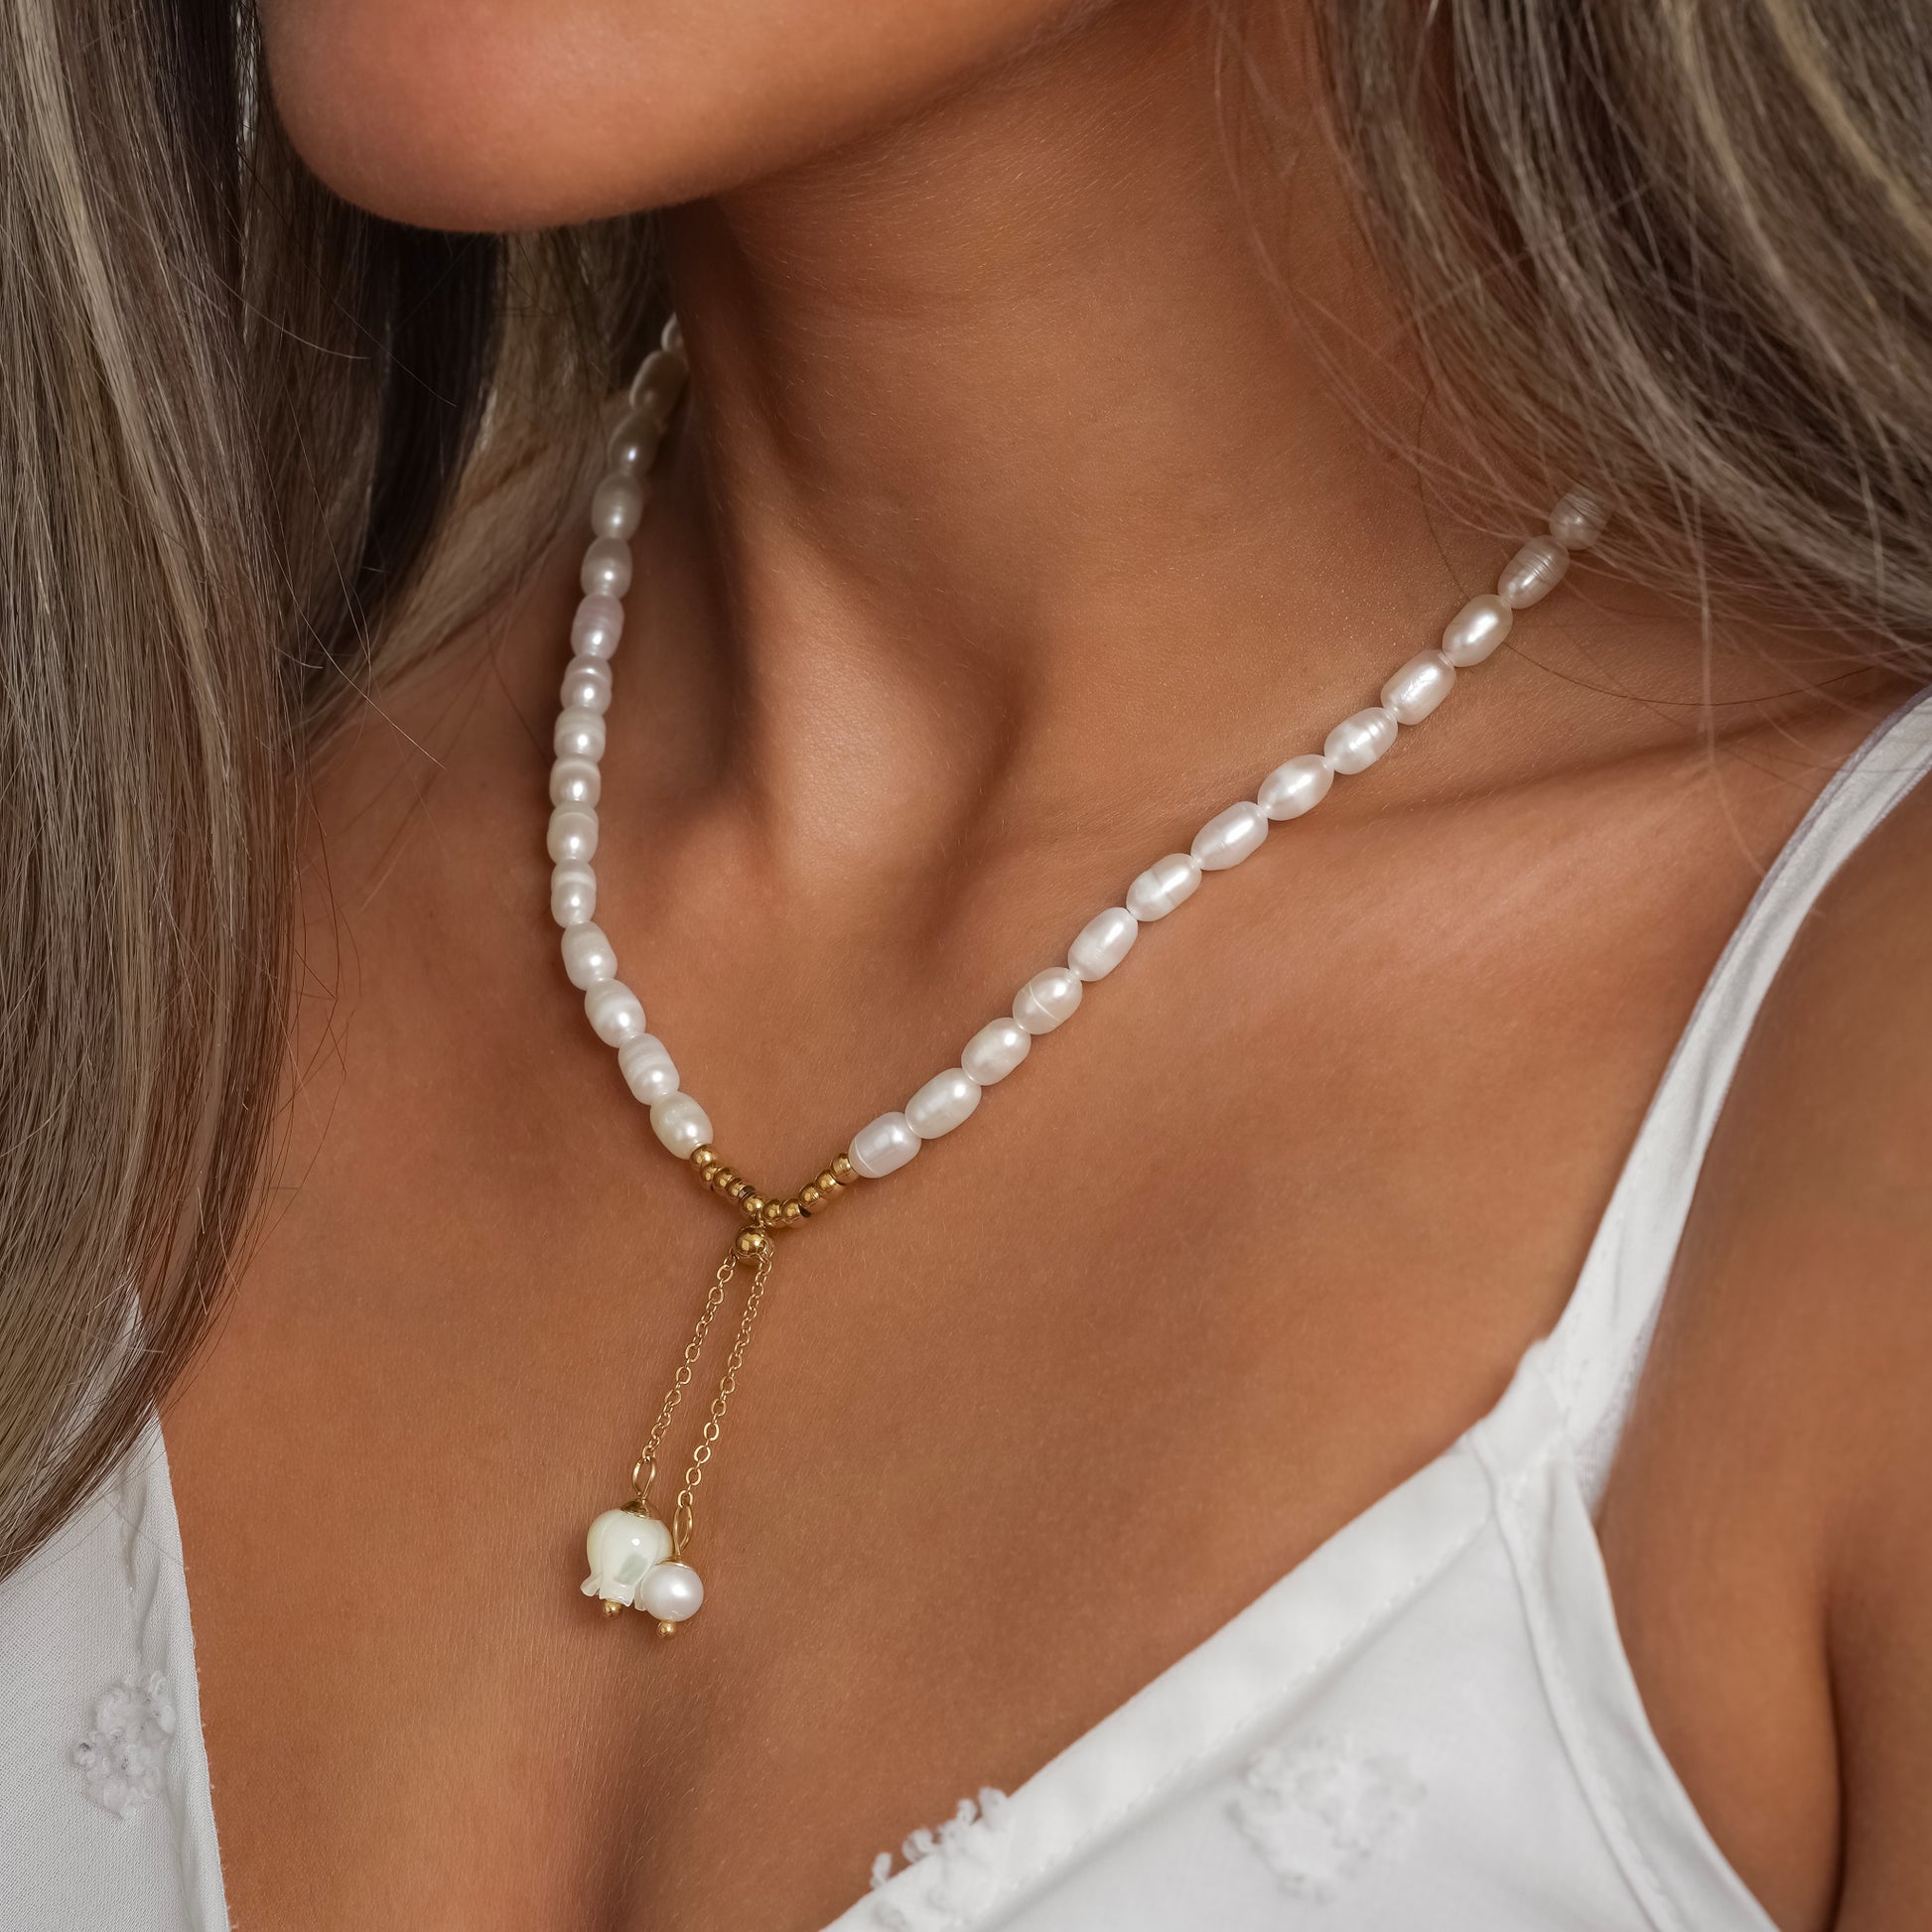 A model in a white dress wearing Lily of the Valley Pearl Necklace